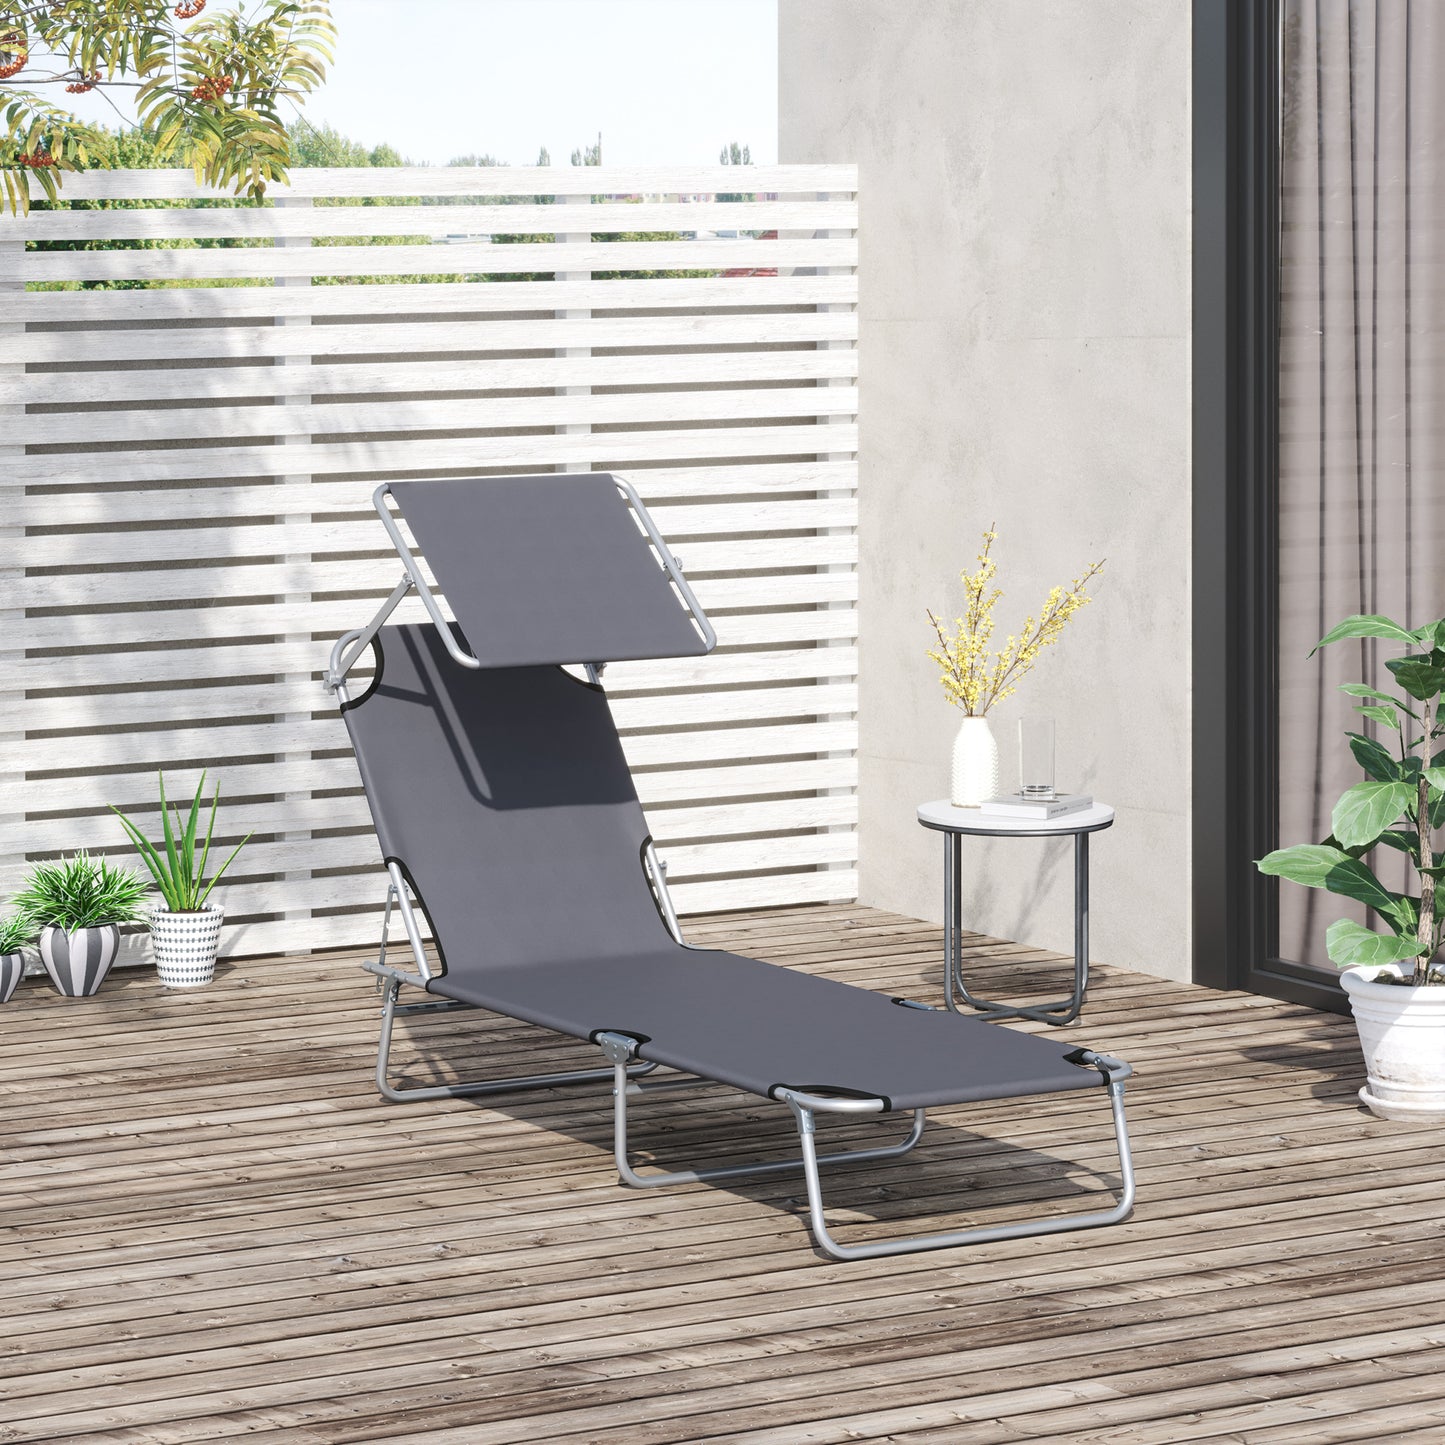 Outsunny Adjustable Lounger Seat with Sun Shade-Grey